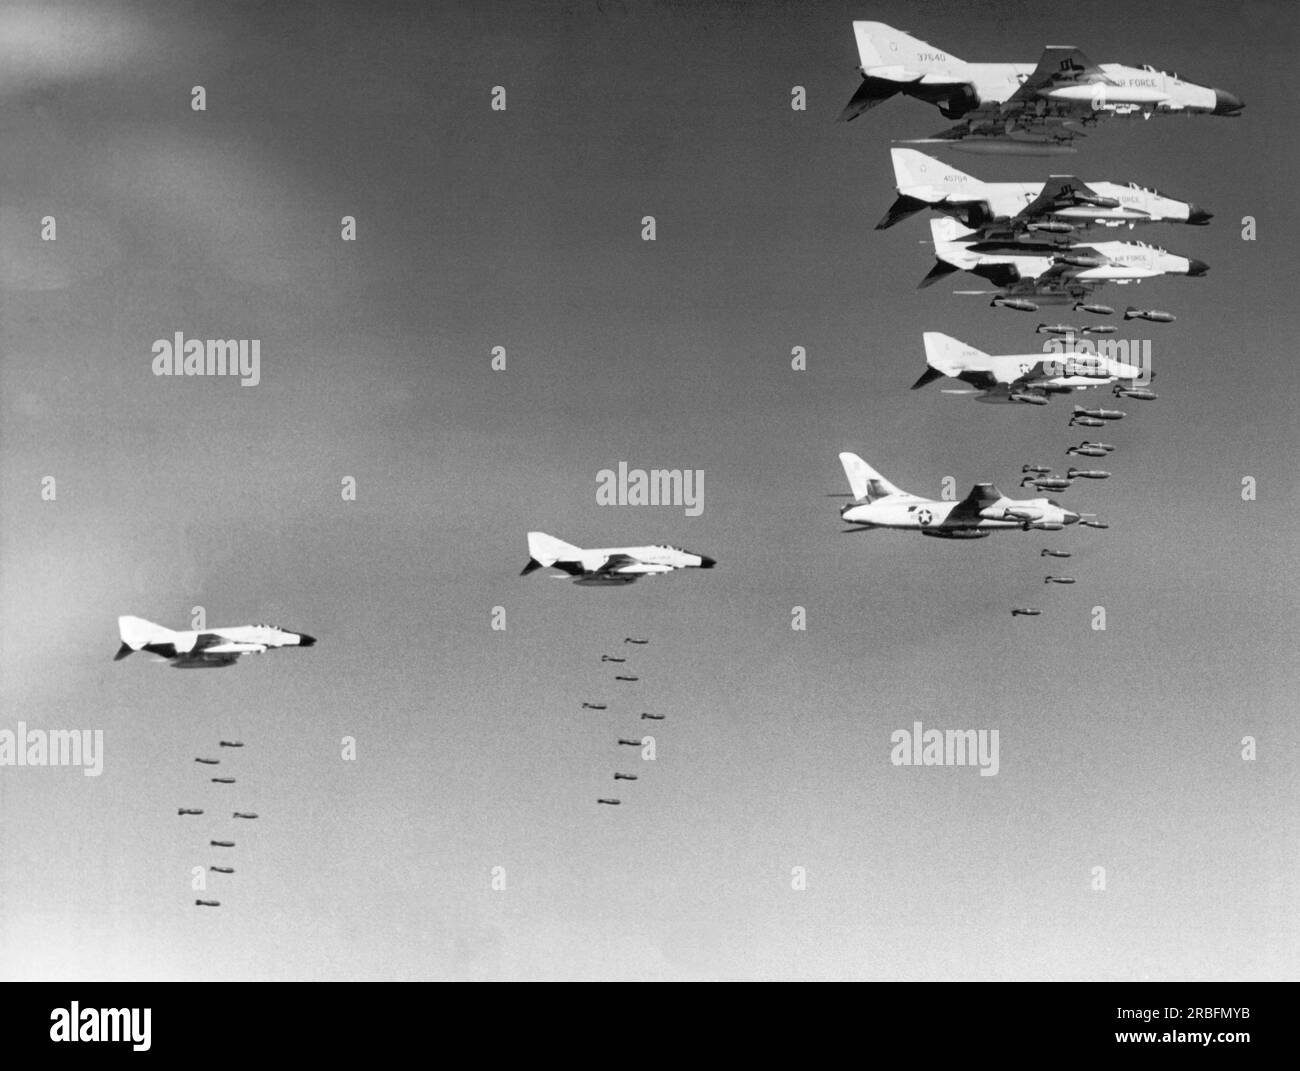 North Vietnam:  January 31, 1966 U.S. Air Force F-4C Phantom planes dropping bombs on Communist military targets in North Vietnam. The Phantom crews are guided under radar control by an Air Force B-66 Destroyer aircraft. Stock Photo